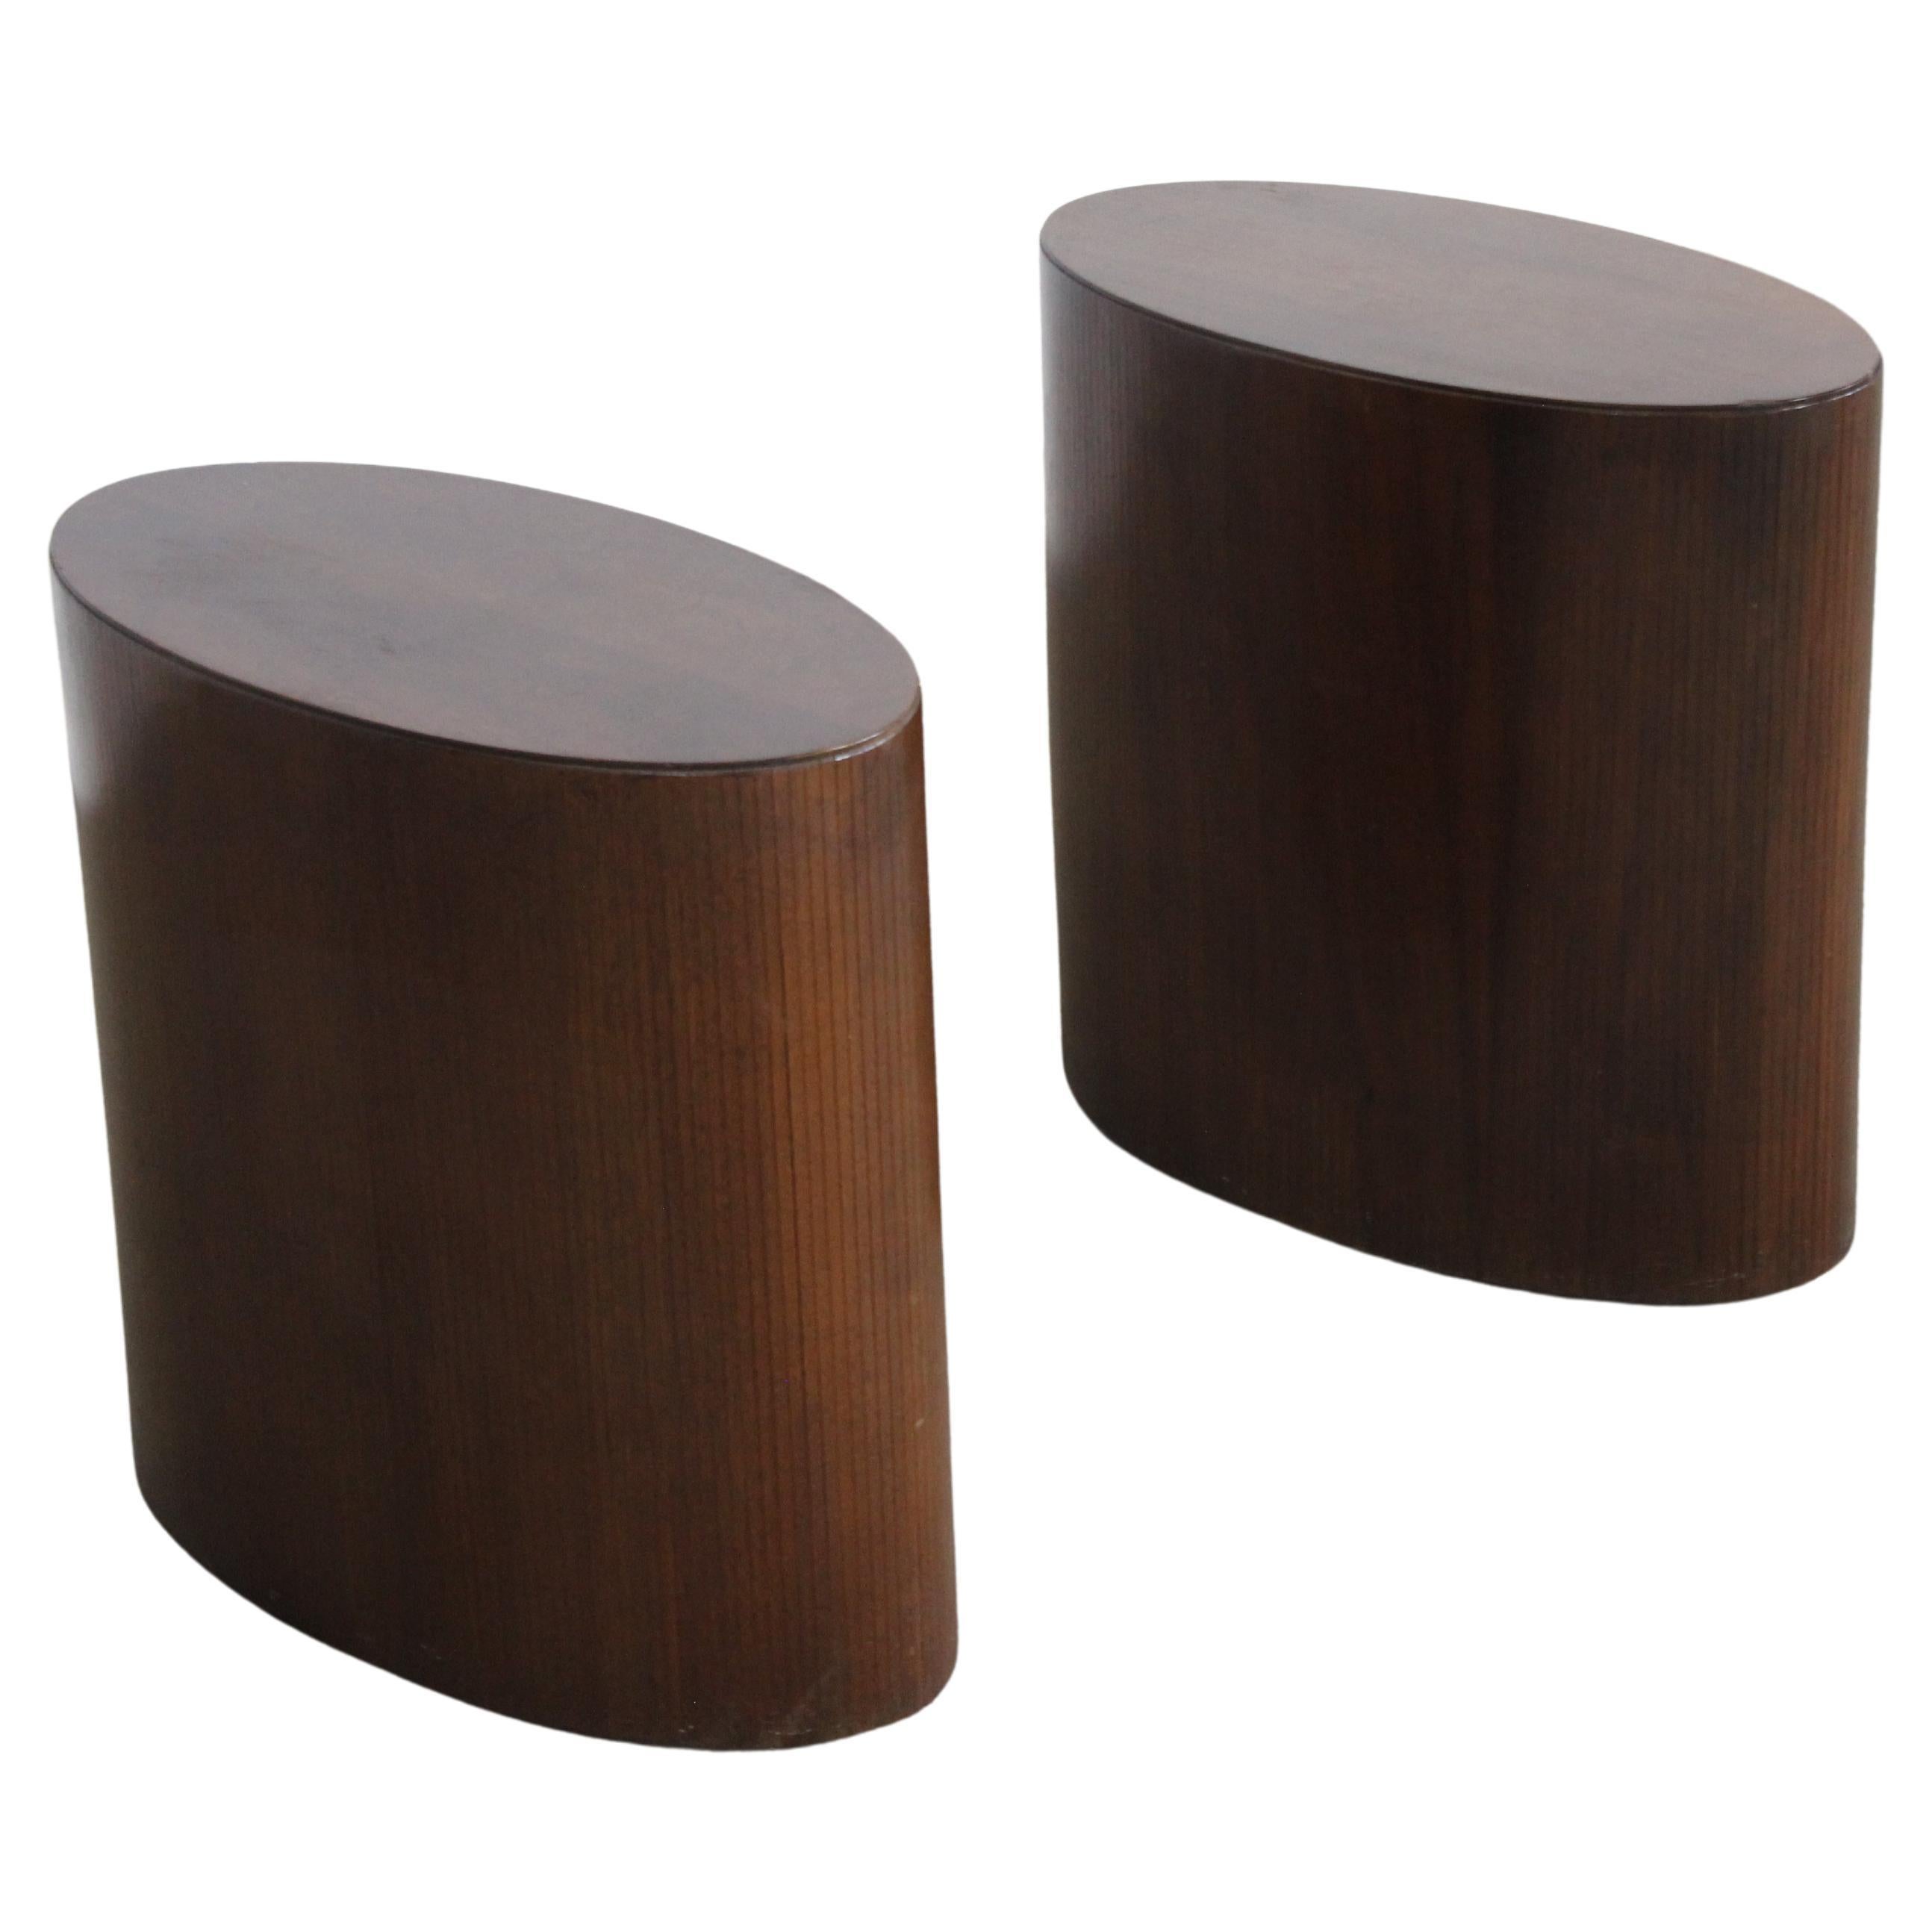 Pair of Mid-Century Modern Oval Walnut Pedestal/Stands/End Table by Lane For Sale